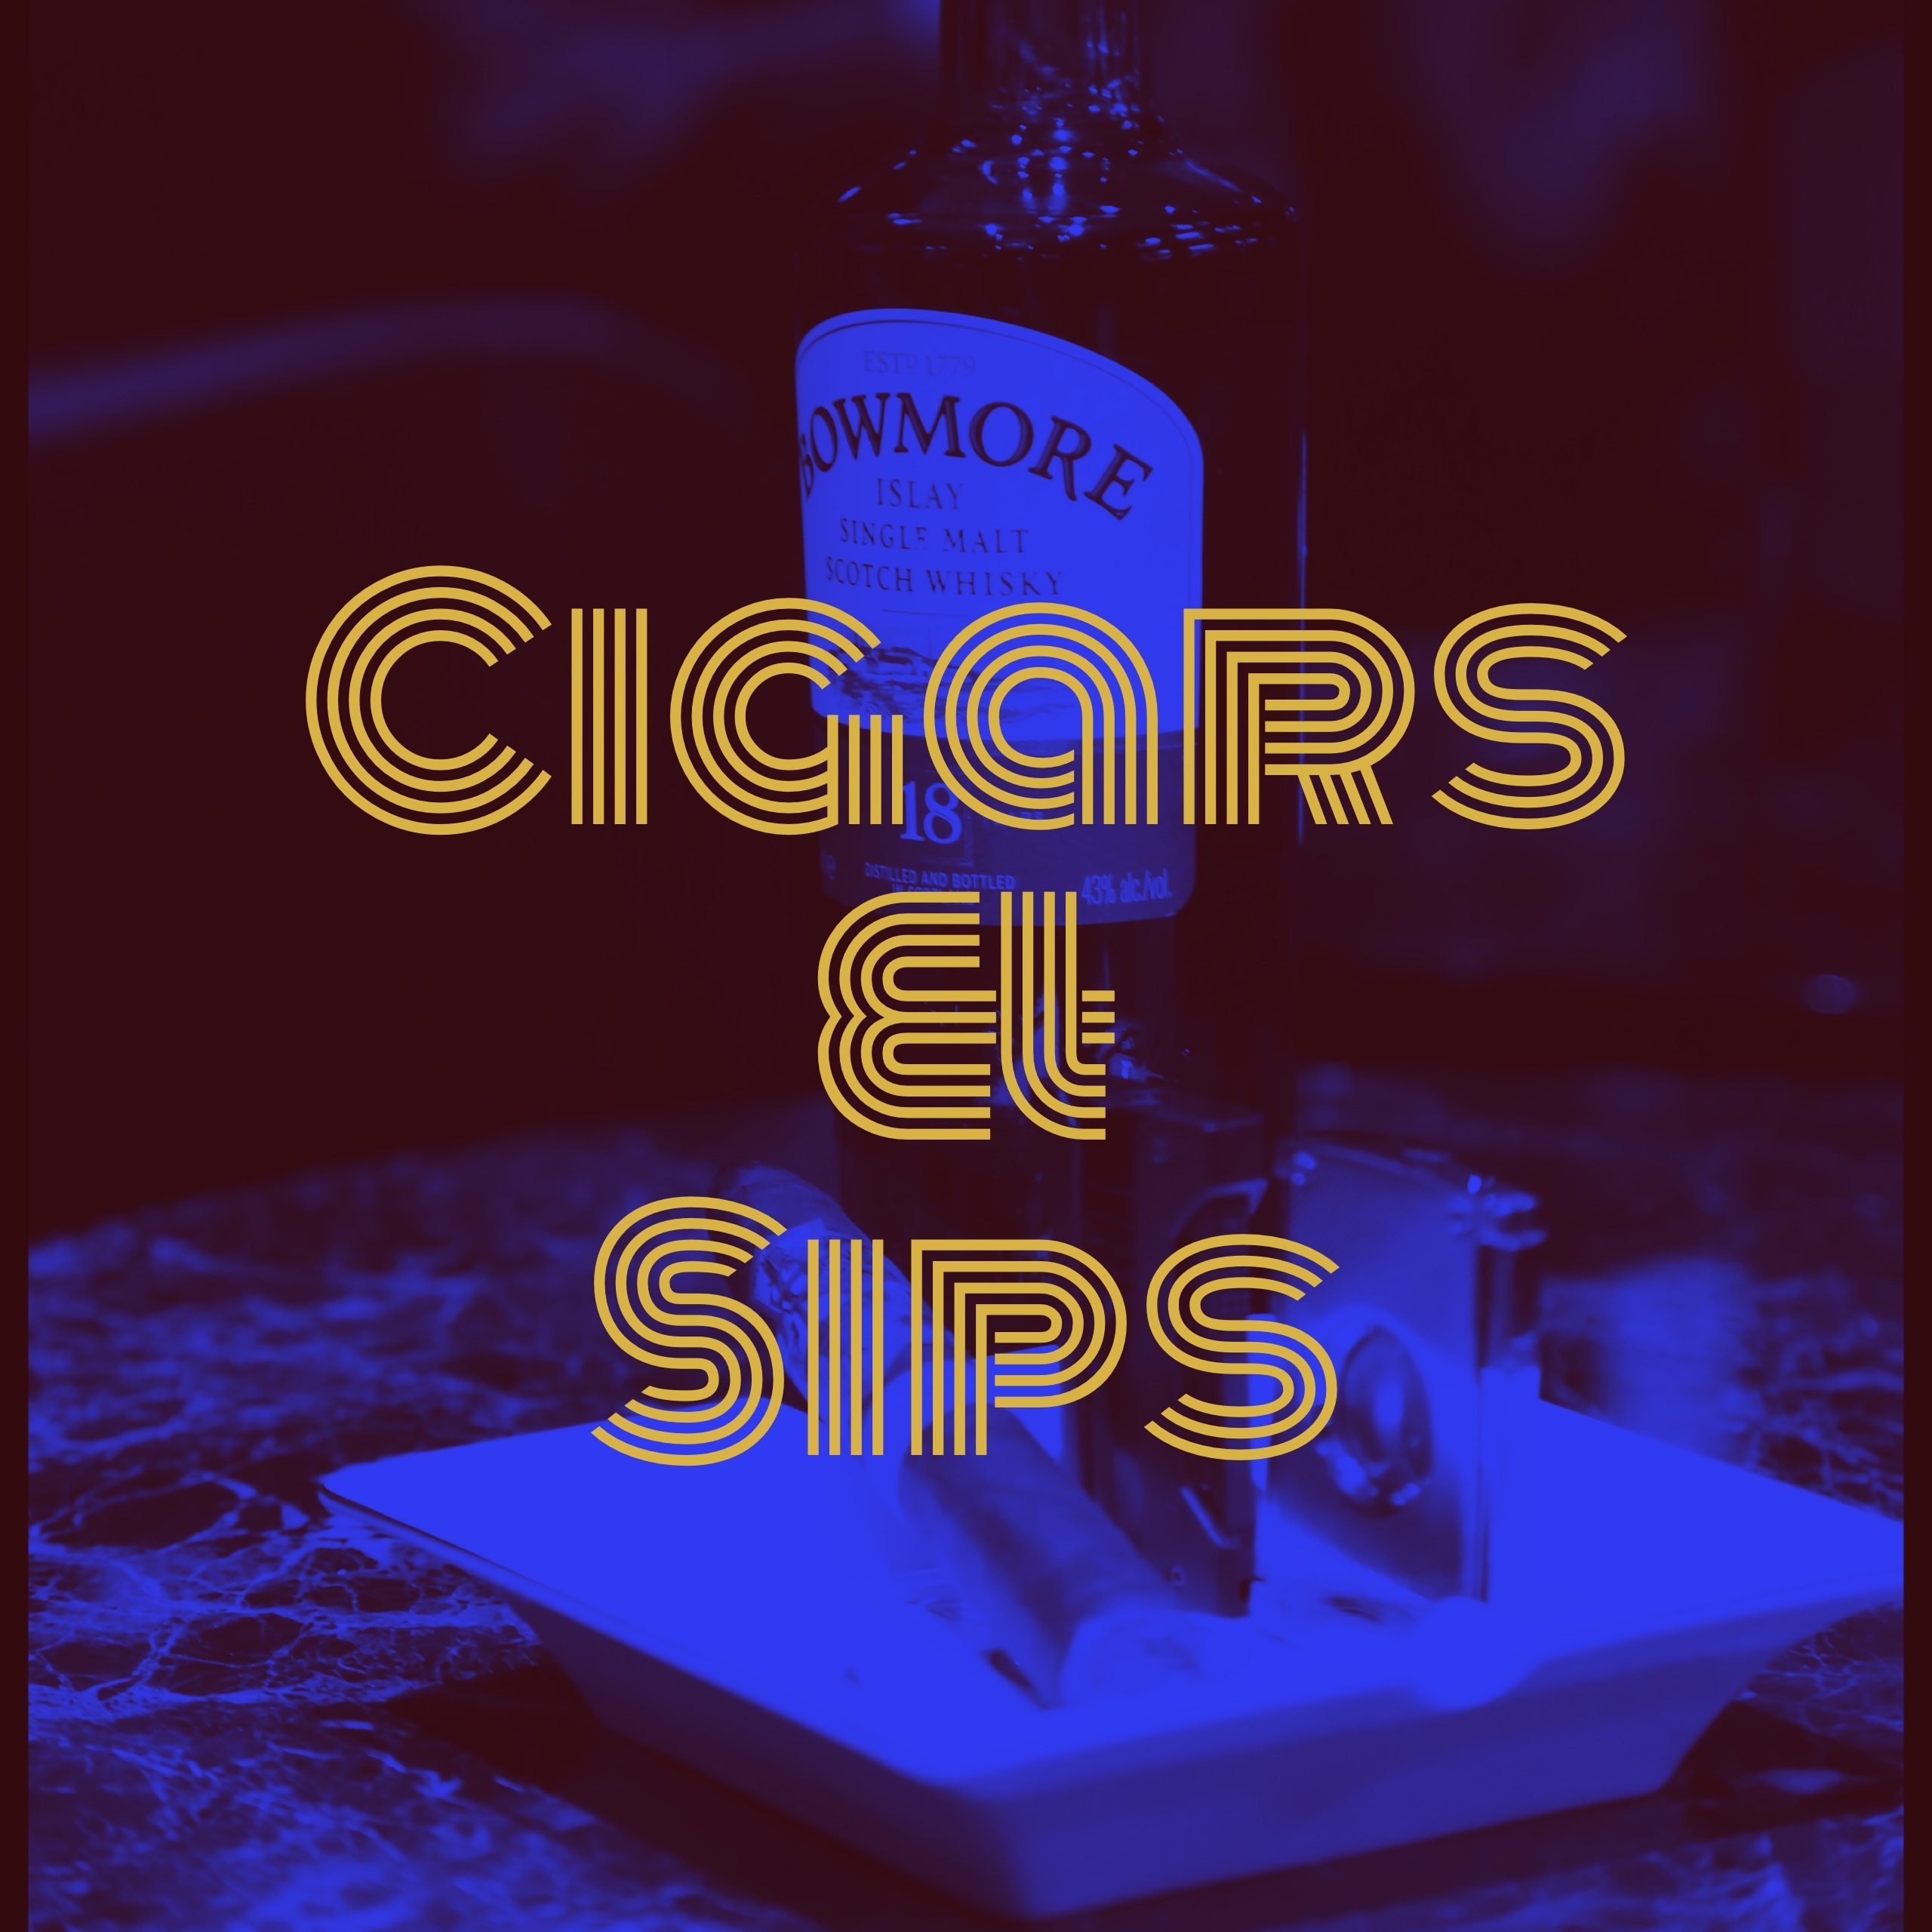 Cigars and Sips